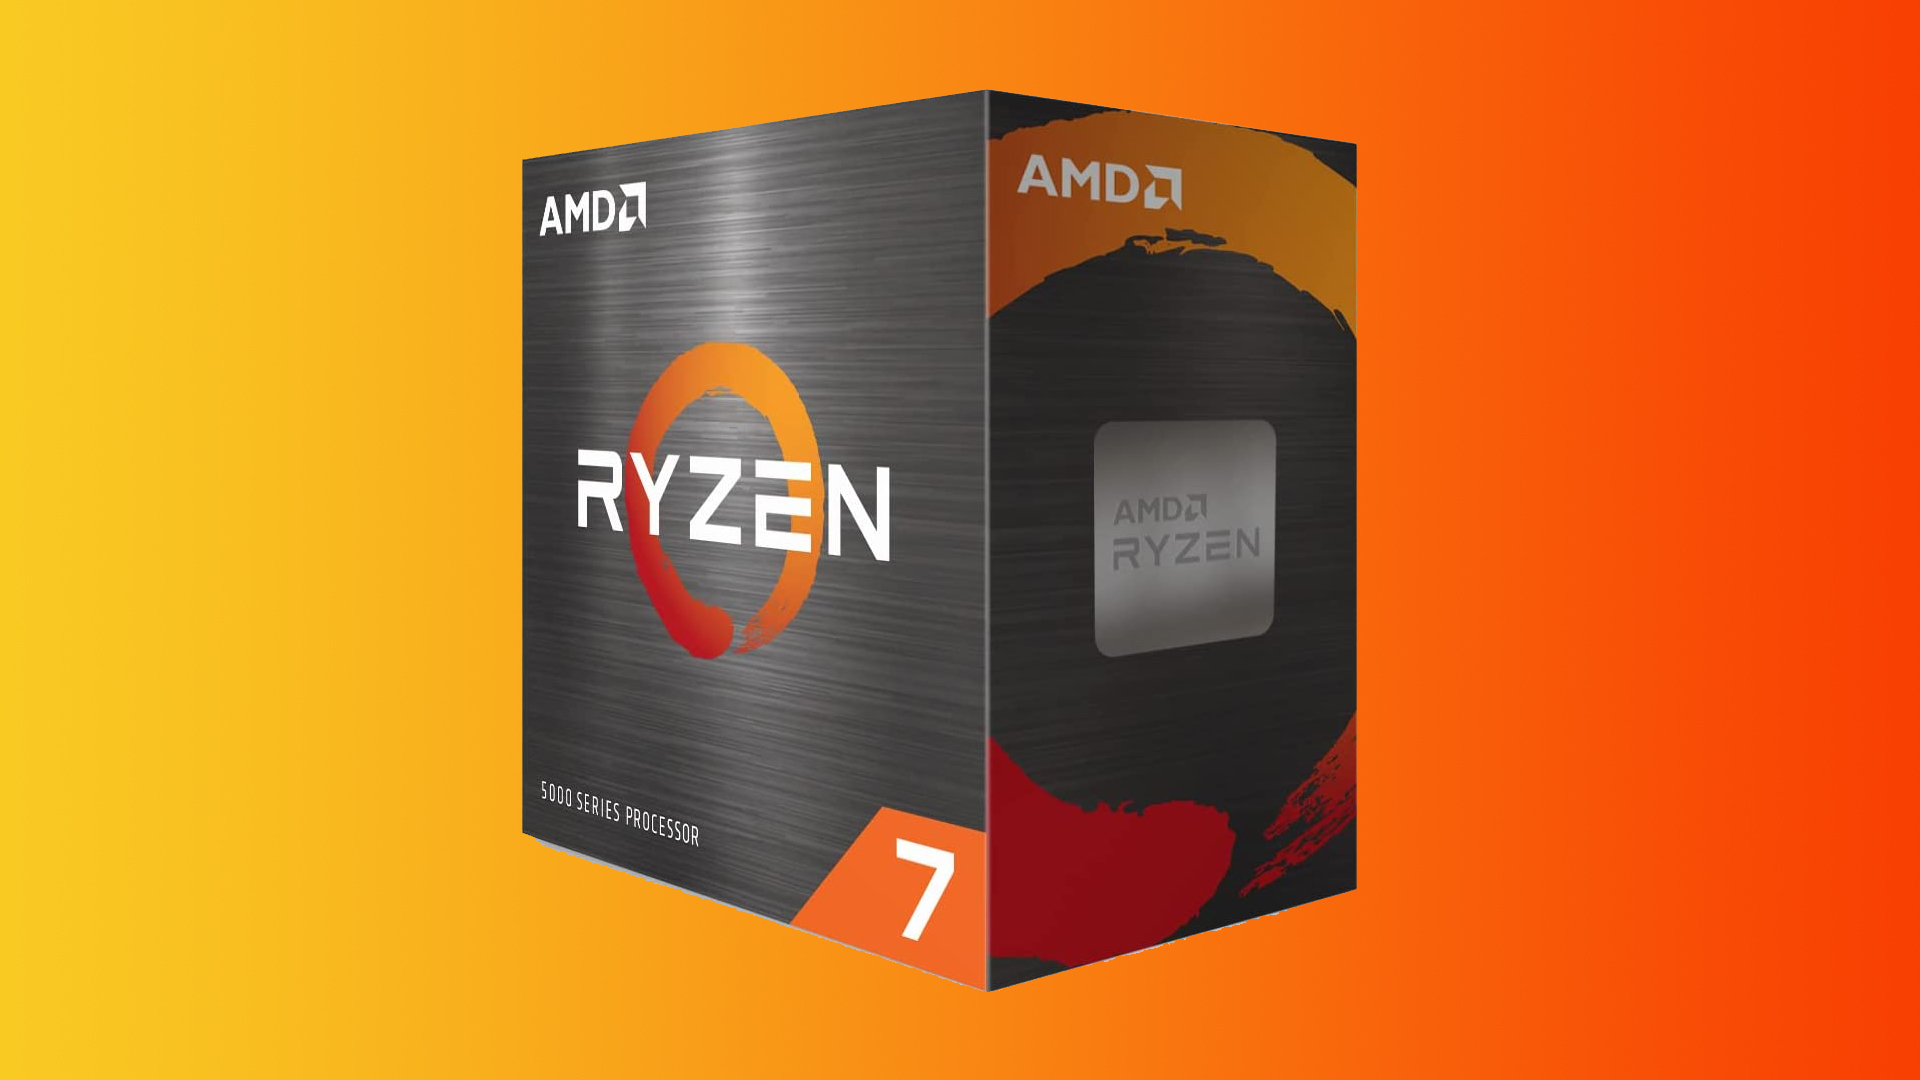 The excellent AMD Ryzen 5 5700X is just £161 from Amazon right now